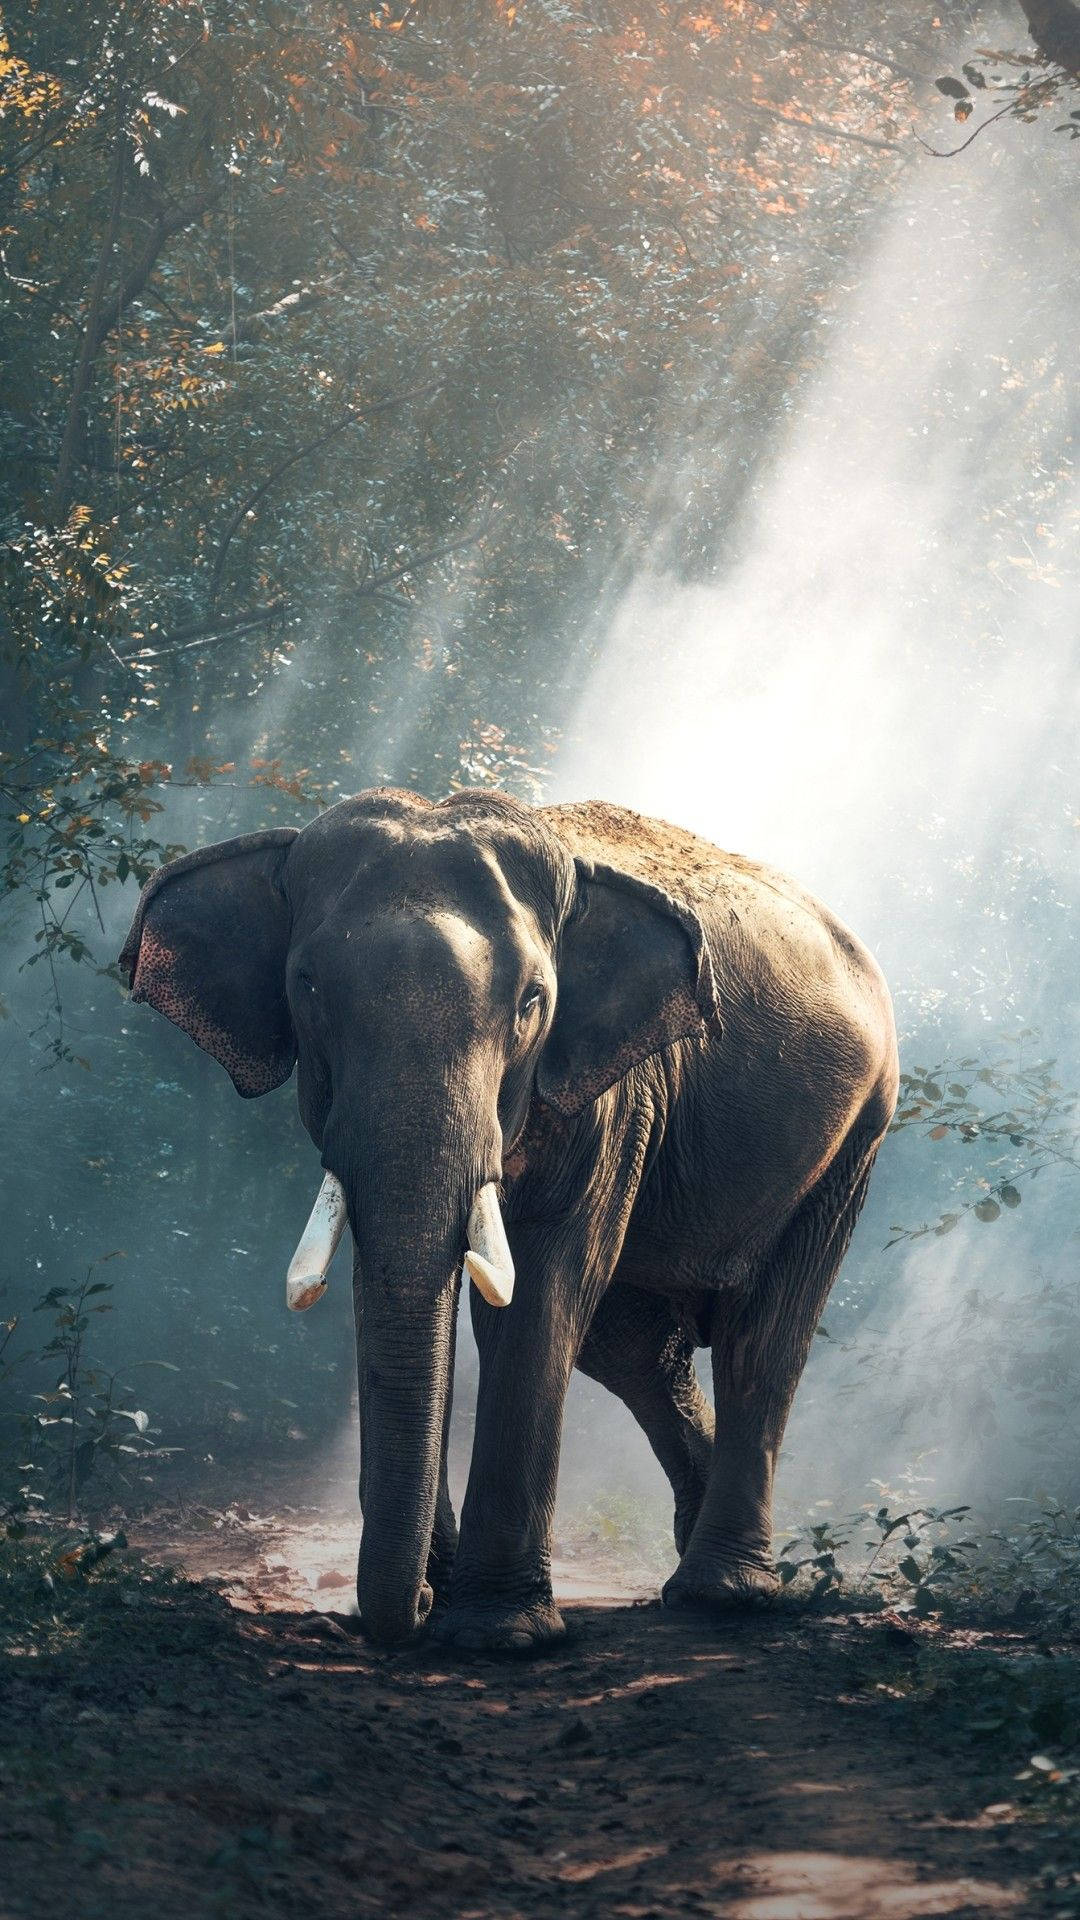 Elephant In Forest Africa Iphone Wallpaper